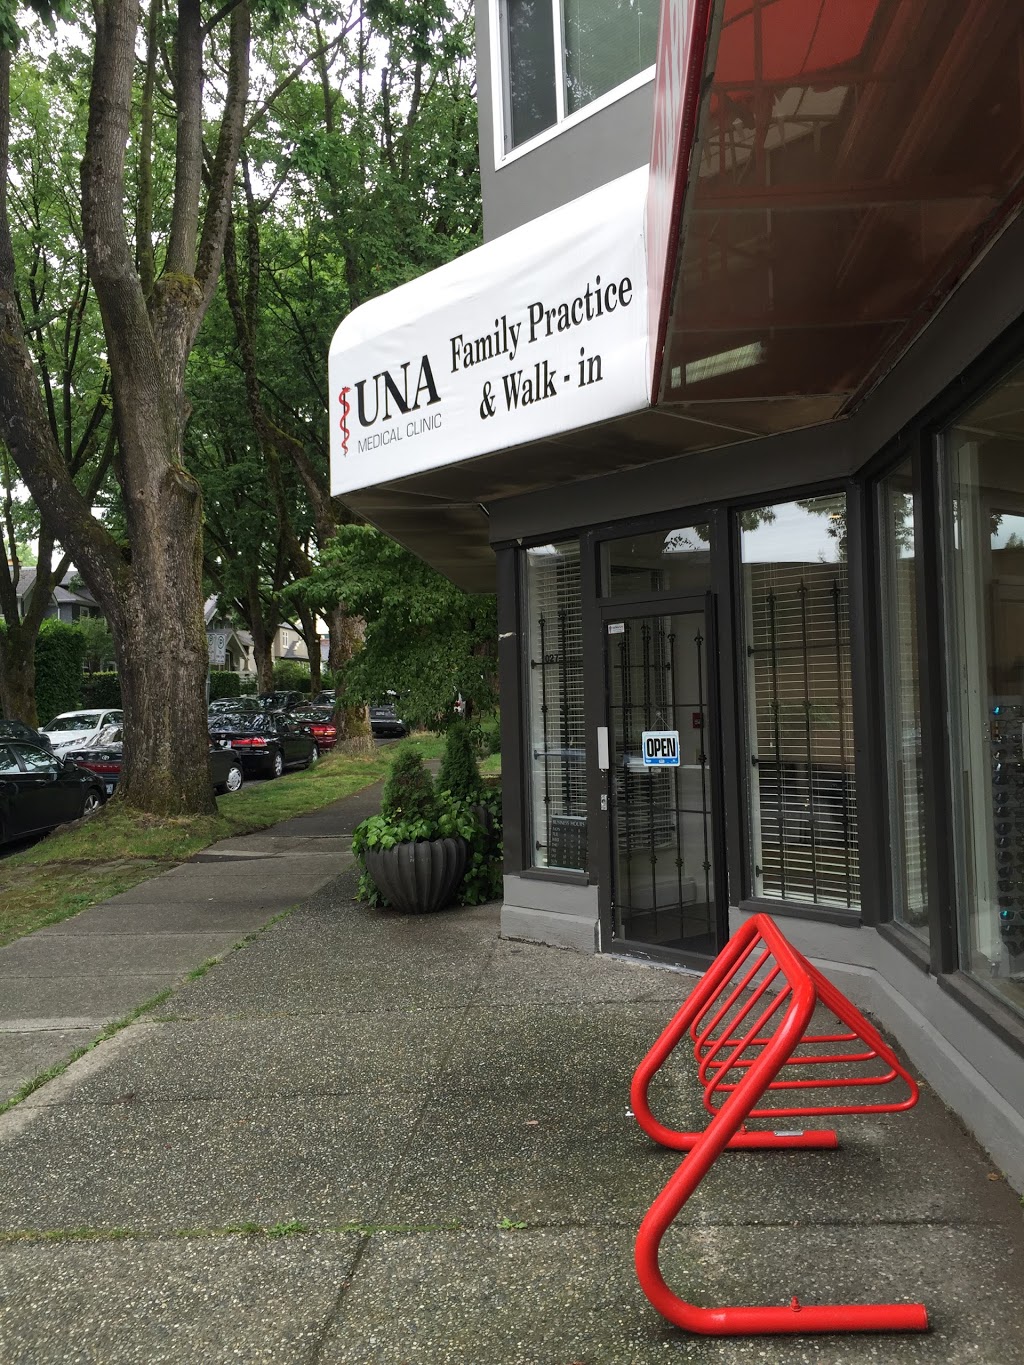 UNA Medical Clinic | 1027 W 15th Ave, Vancouver, BC V6H 1R7, Canada | Phone: (604) 730-7177